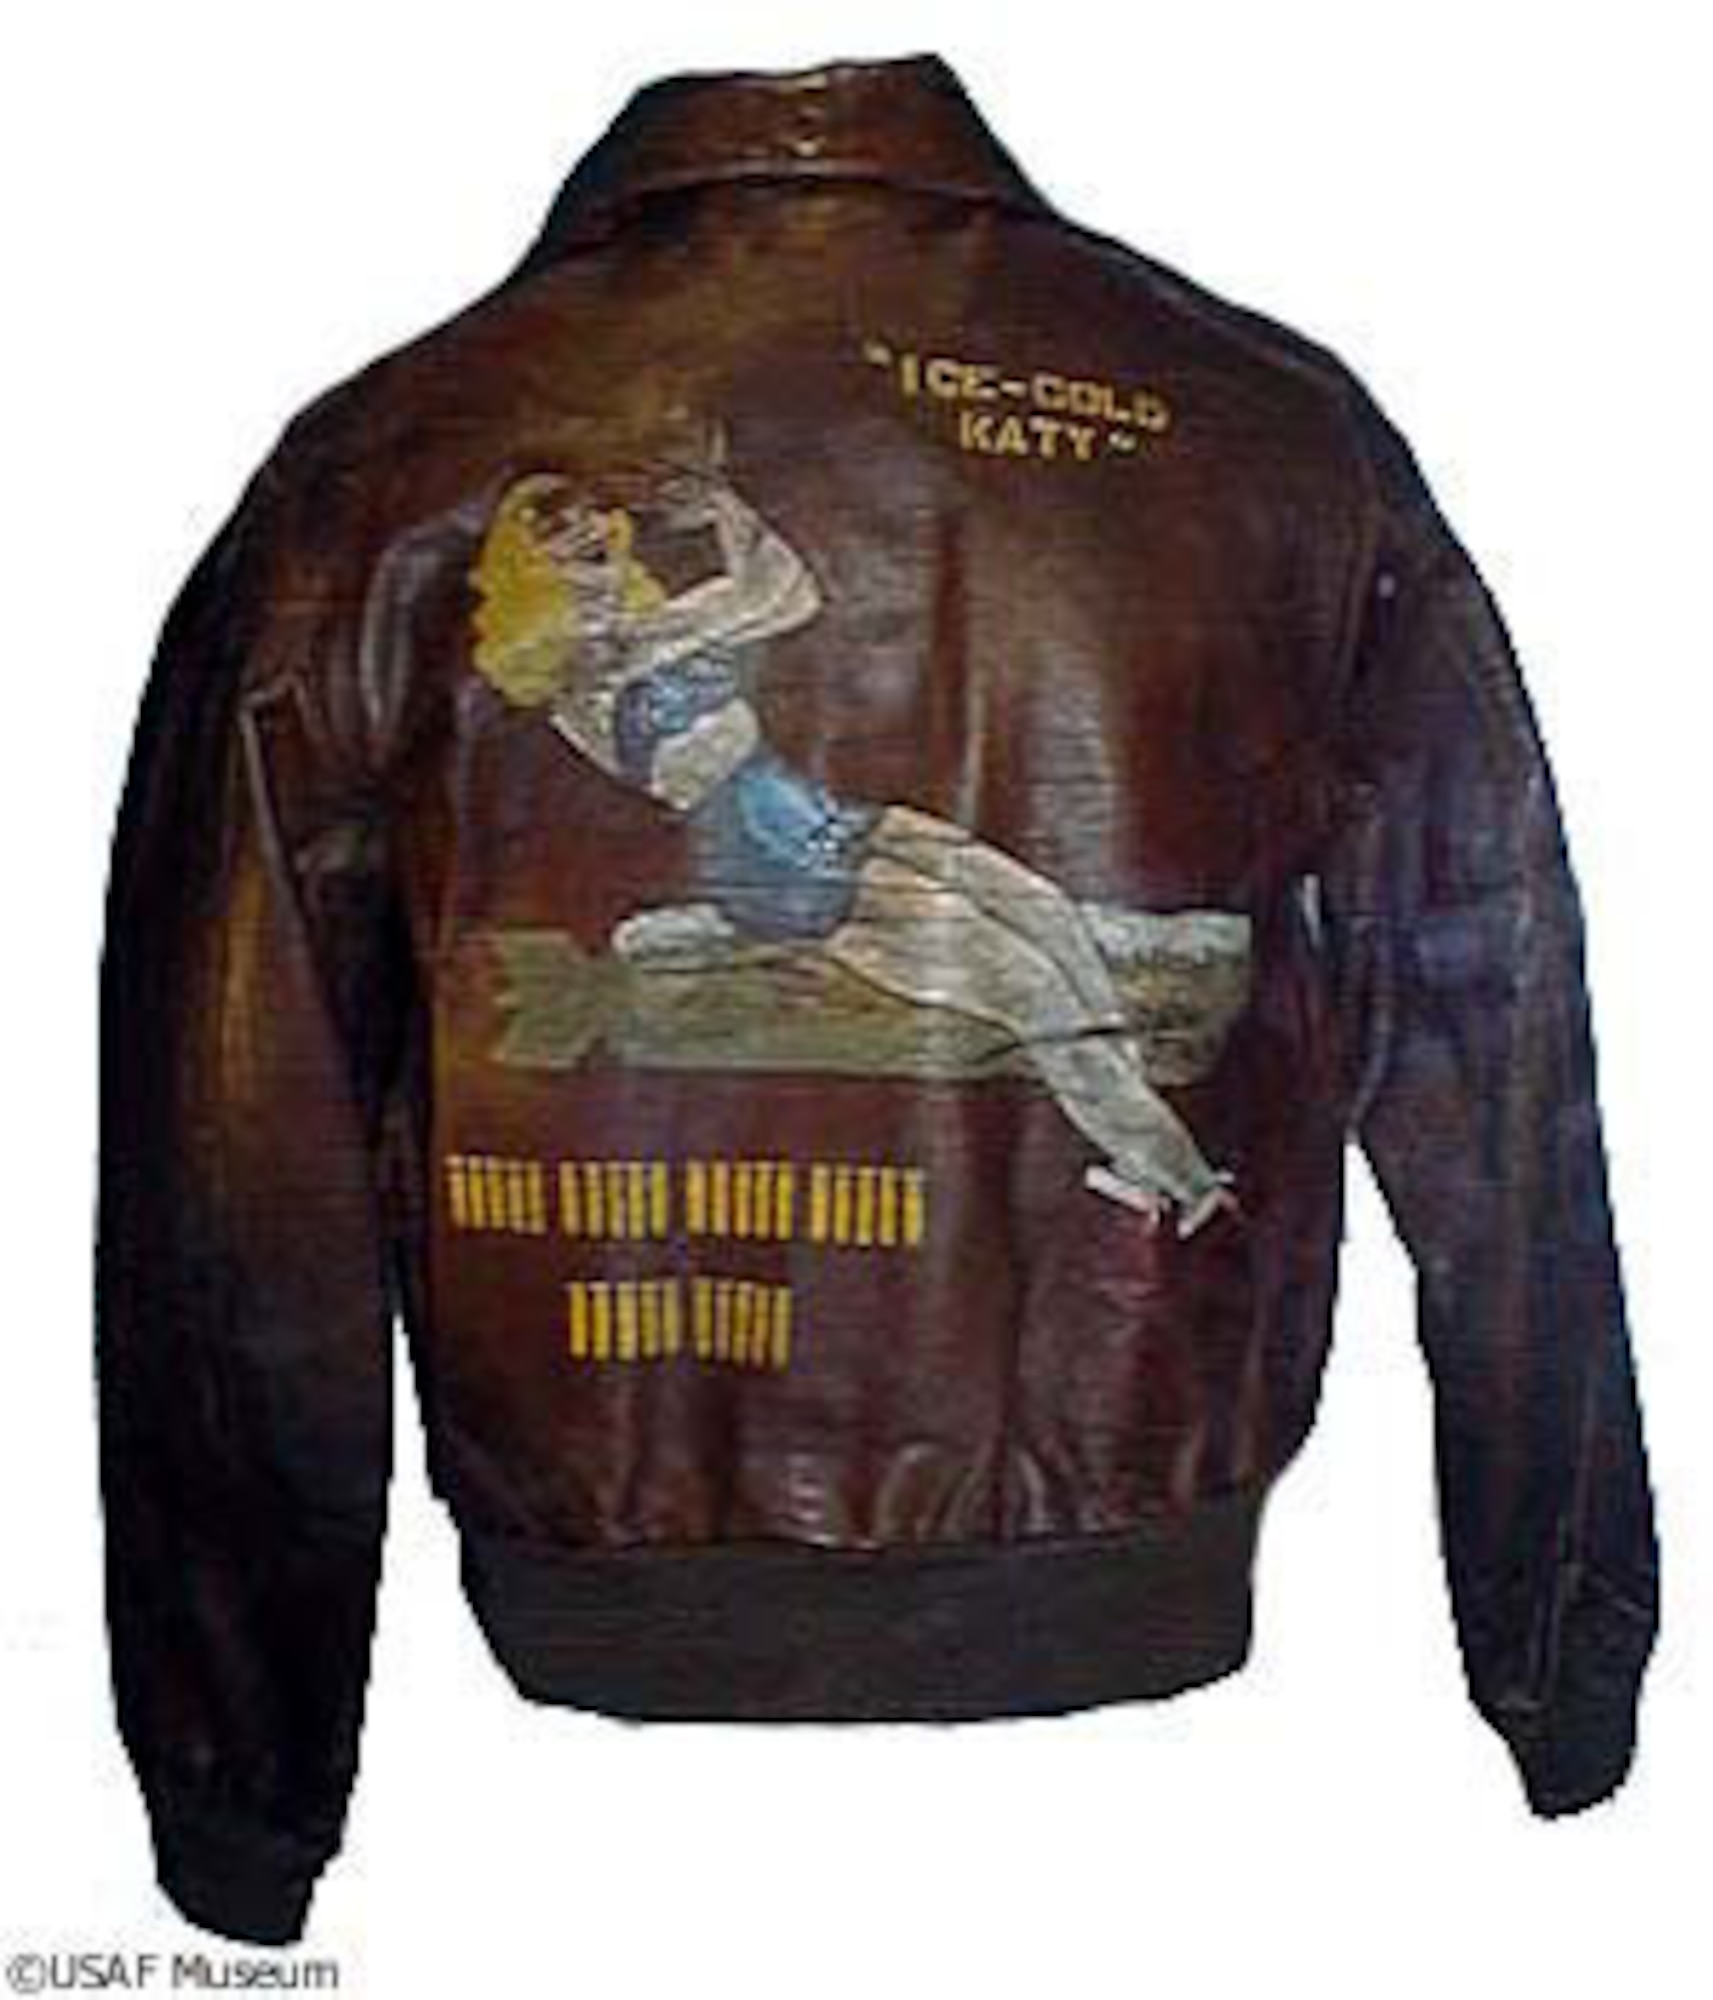 DAYTON, Ohio -- "Ice Cold Katy" aviator jacket on display at the National Museum of the United States Air Force. (U.S. Air Force photo)